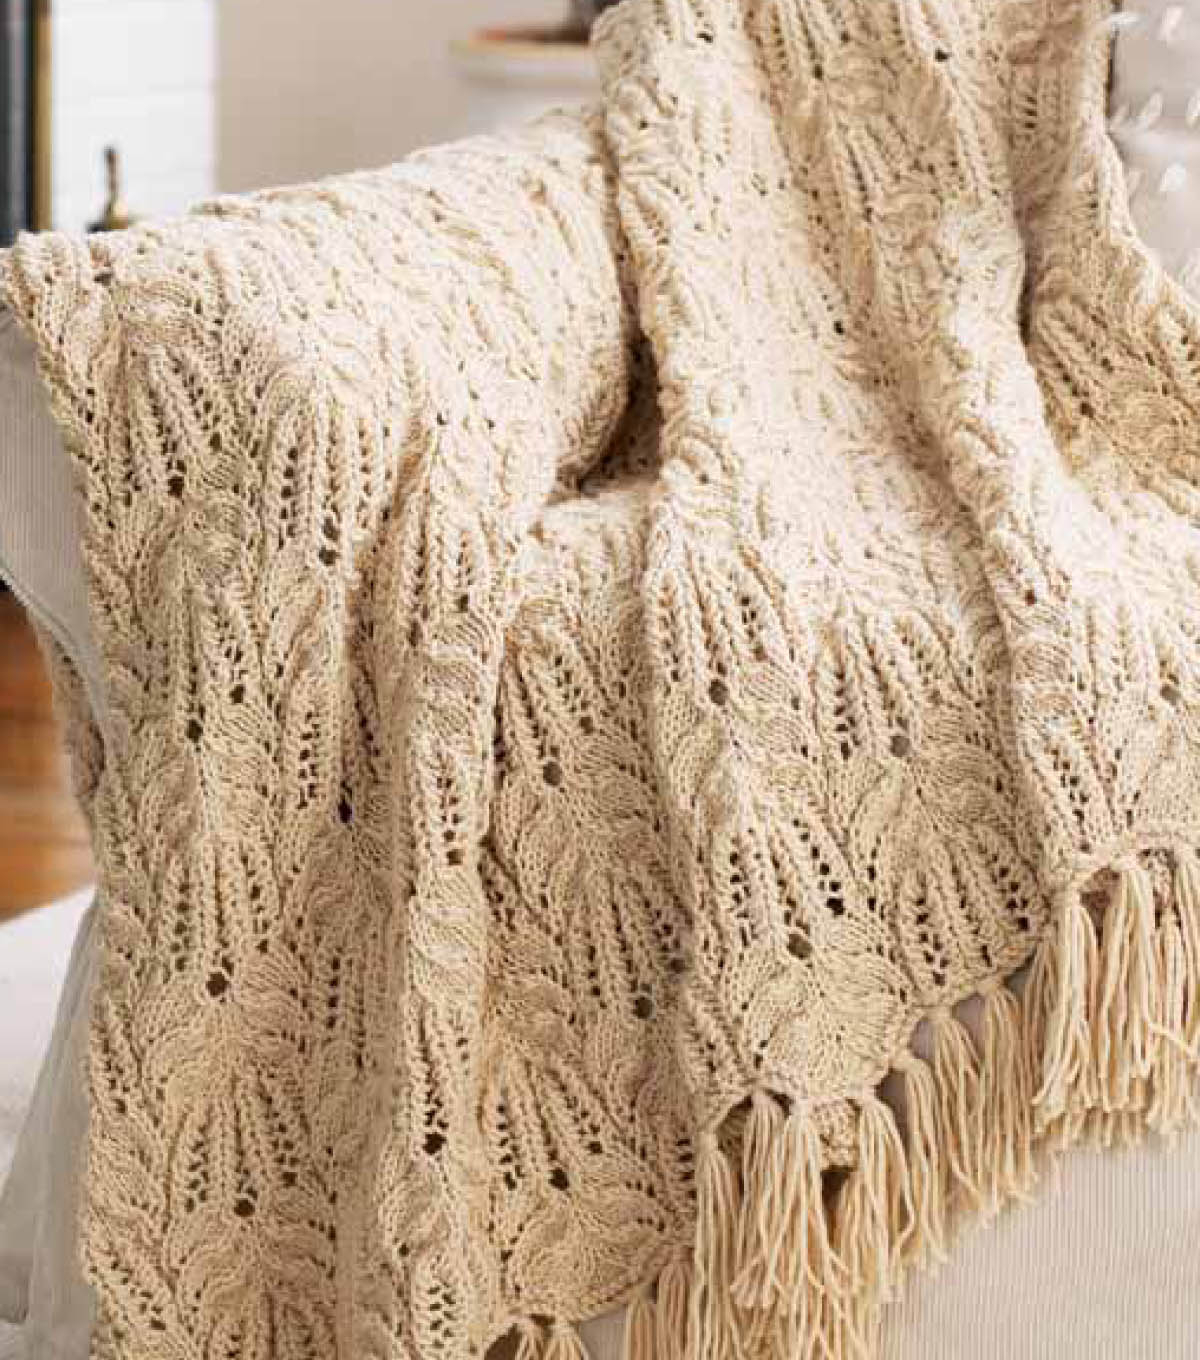 Knit Afghan Patterns Free Free Knitting Pattern Lace And Cable Afghan